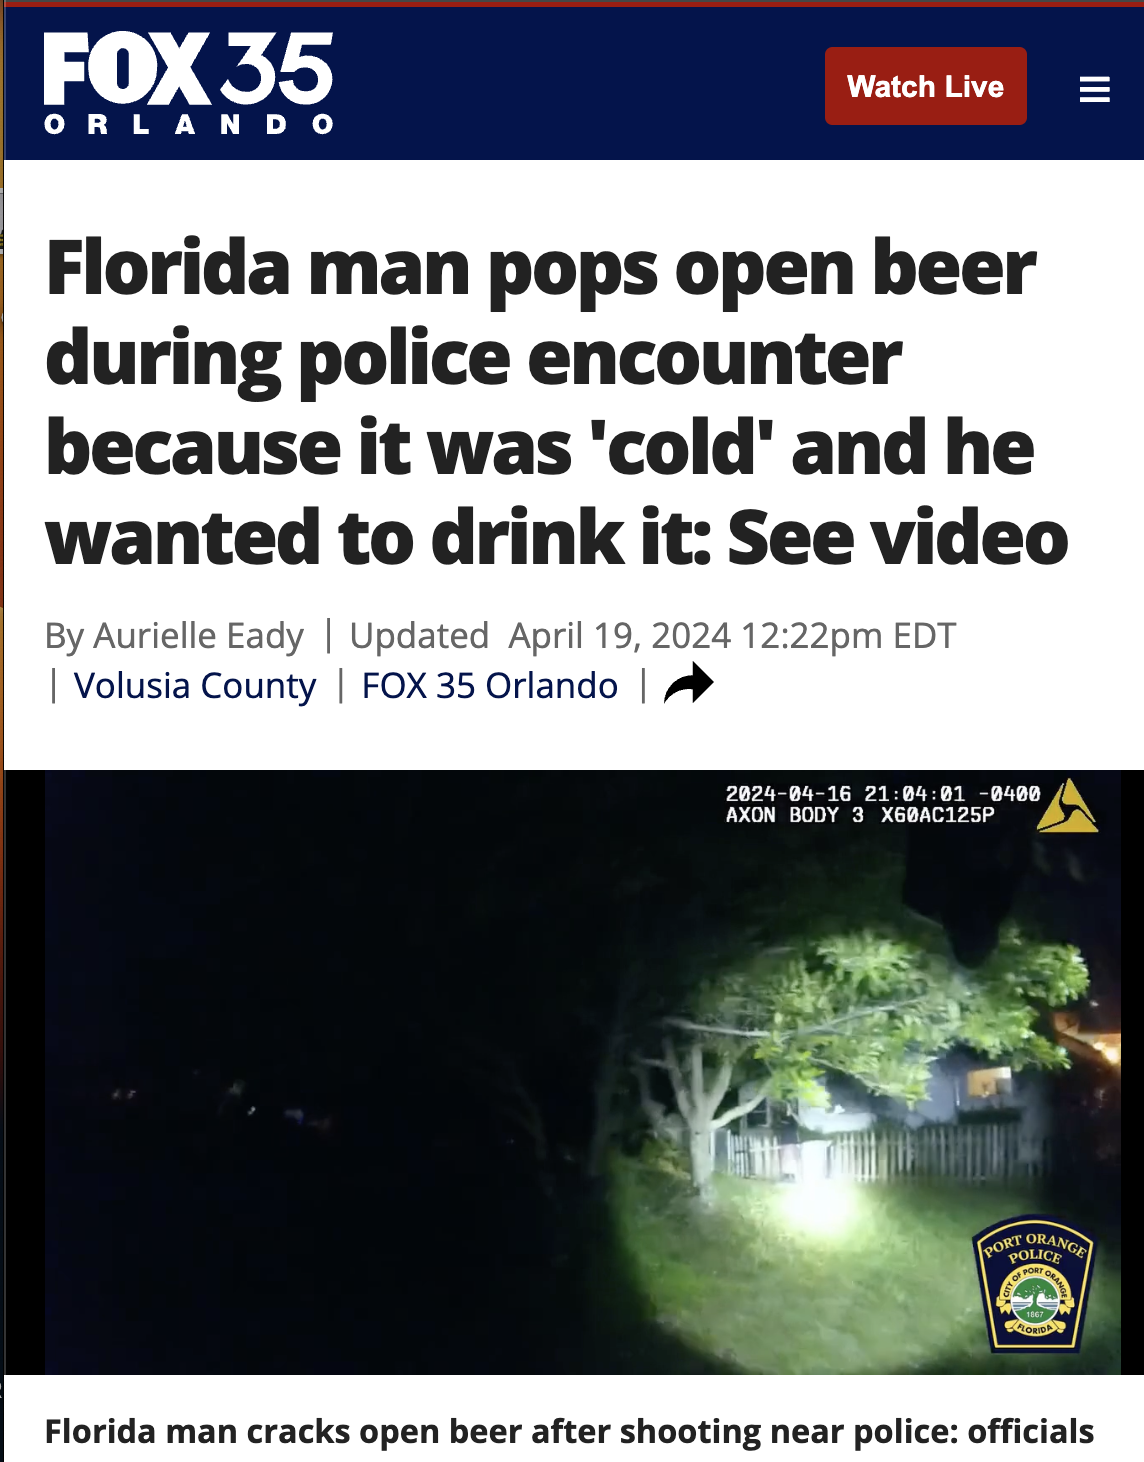 screenshot - Fox 35 Orlando Watch Live Florida man pops open beer during police encounter because it was 'cold' and he wanted to drink it See video By Aurielle Eady | Updated pm Edt Volusia County | Fox 35 Orlando | 28248416 018480 Axon Body 3 X68AC125P F